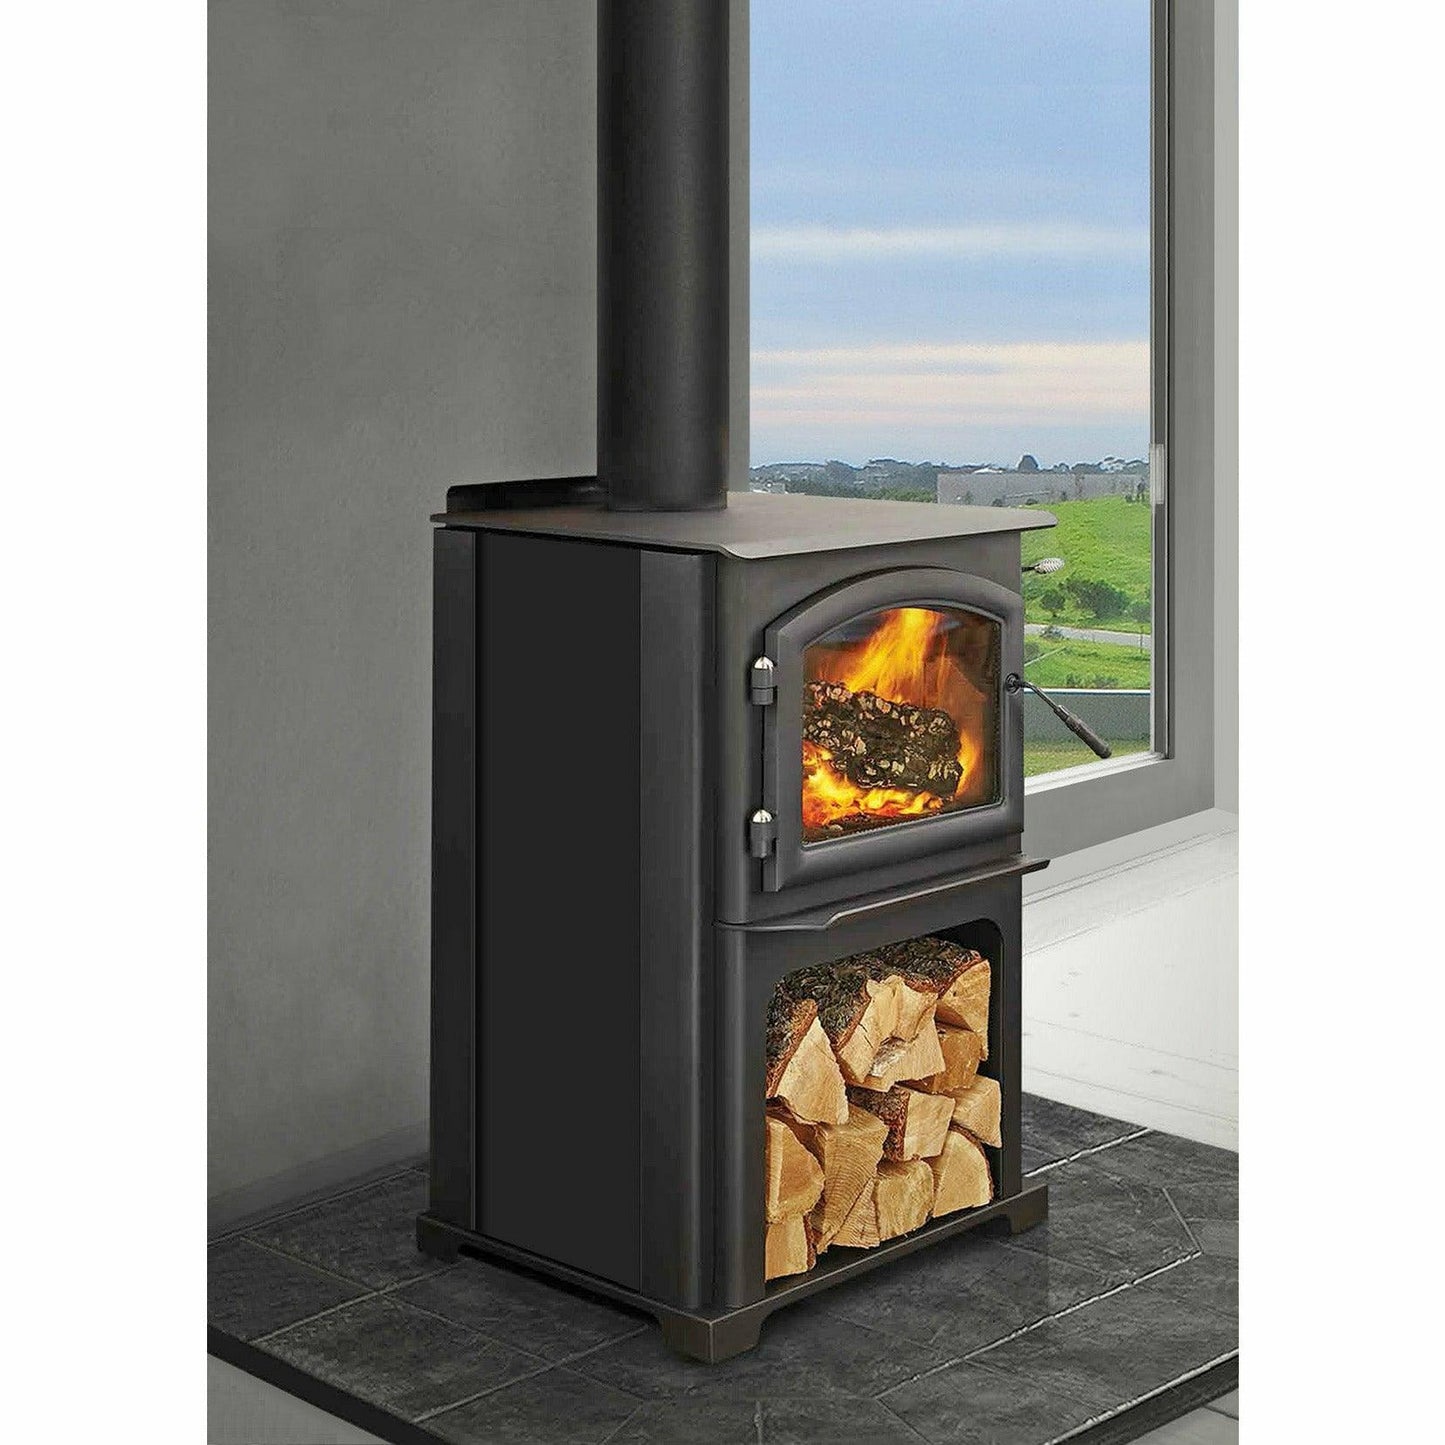 QUADRA-FIRE DISCOVERY II 31LE UNIT WITH ARCHED DOOR - Horizon Leisure